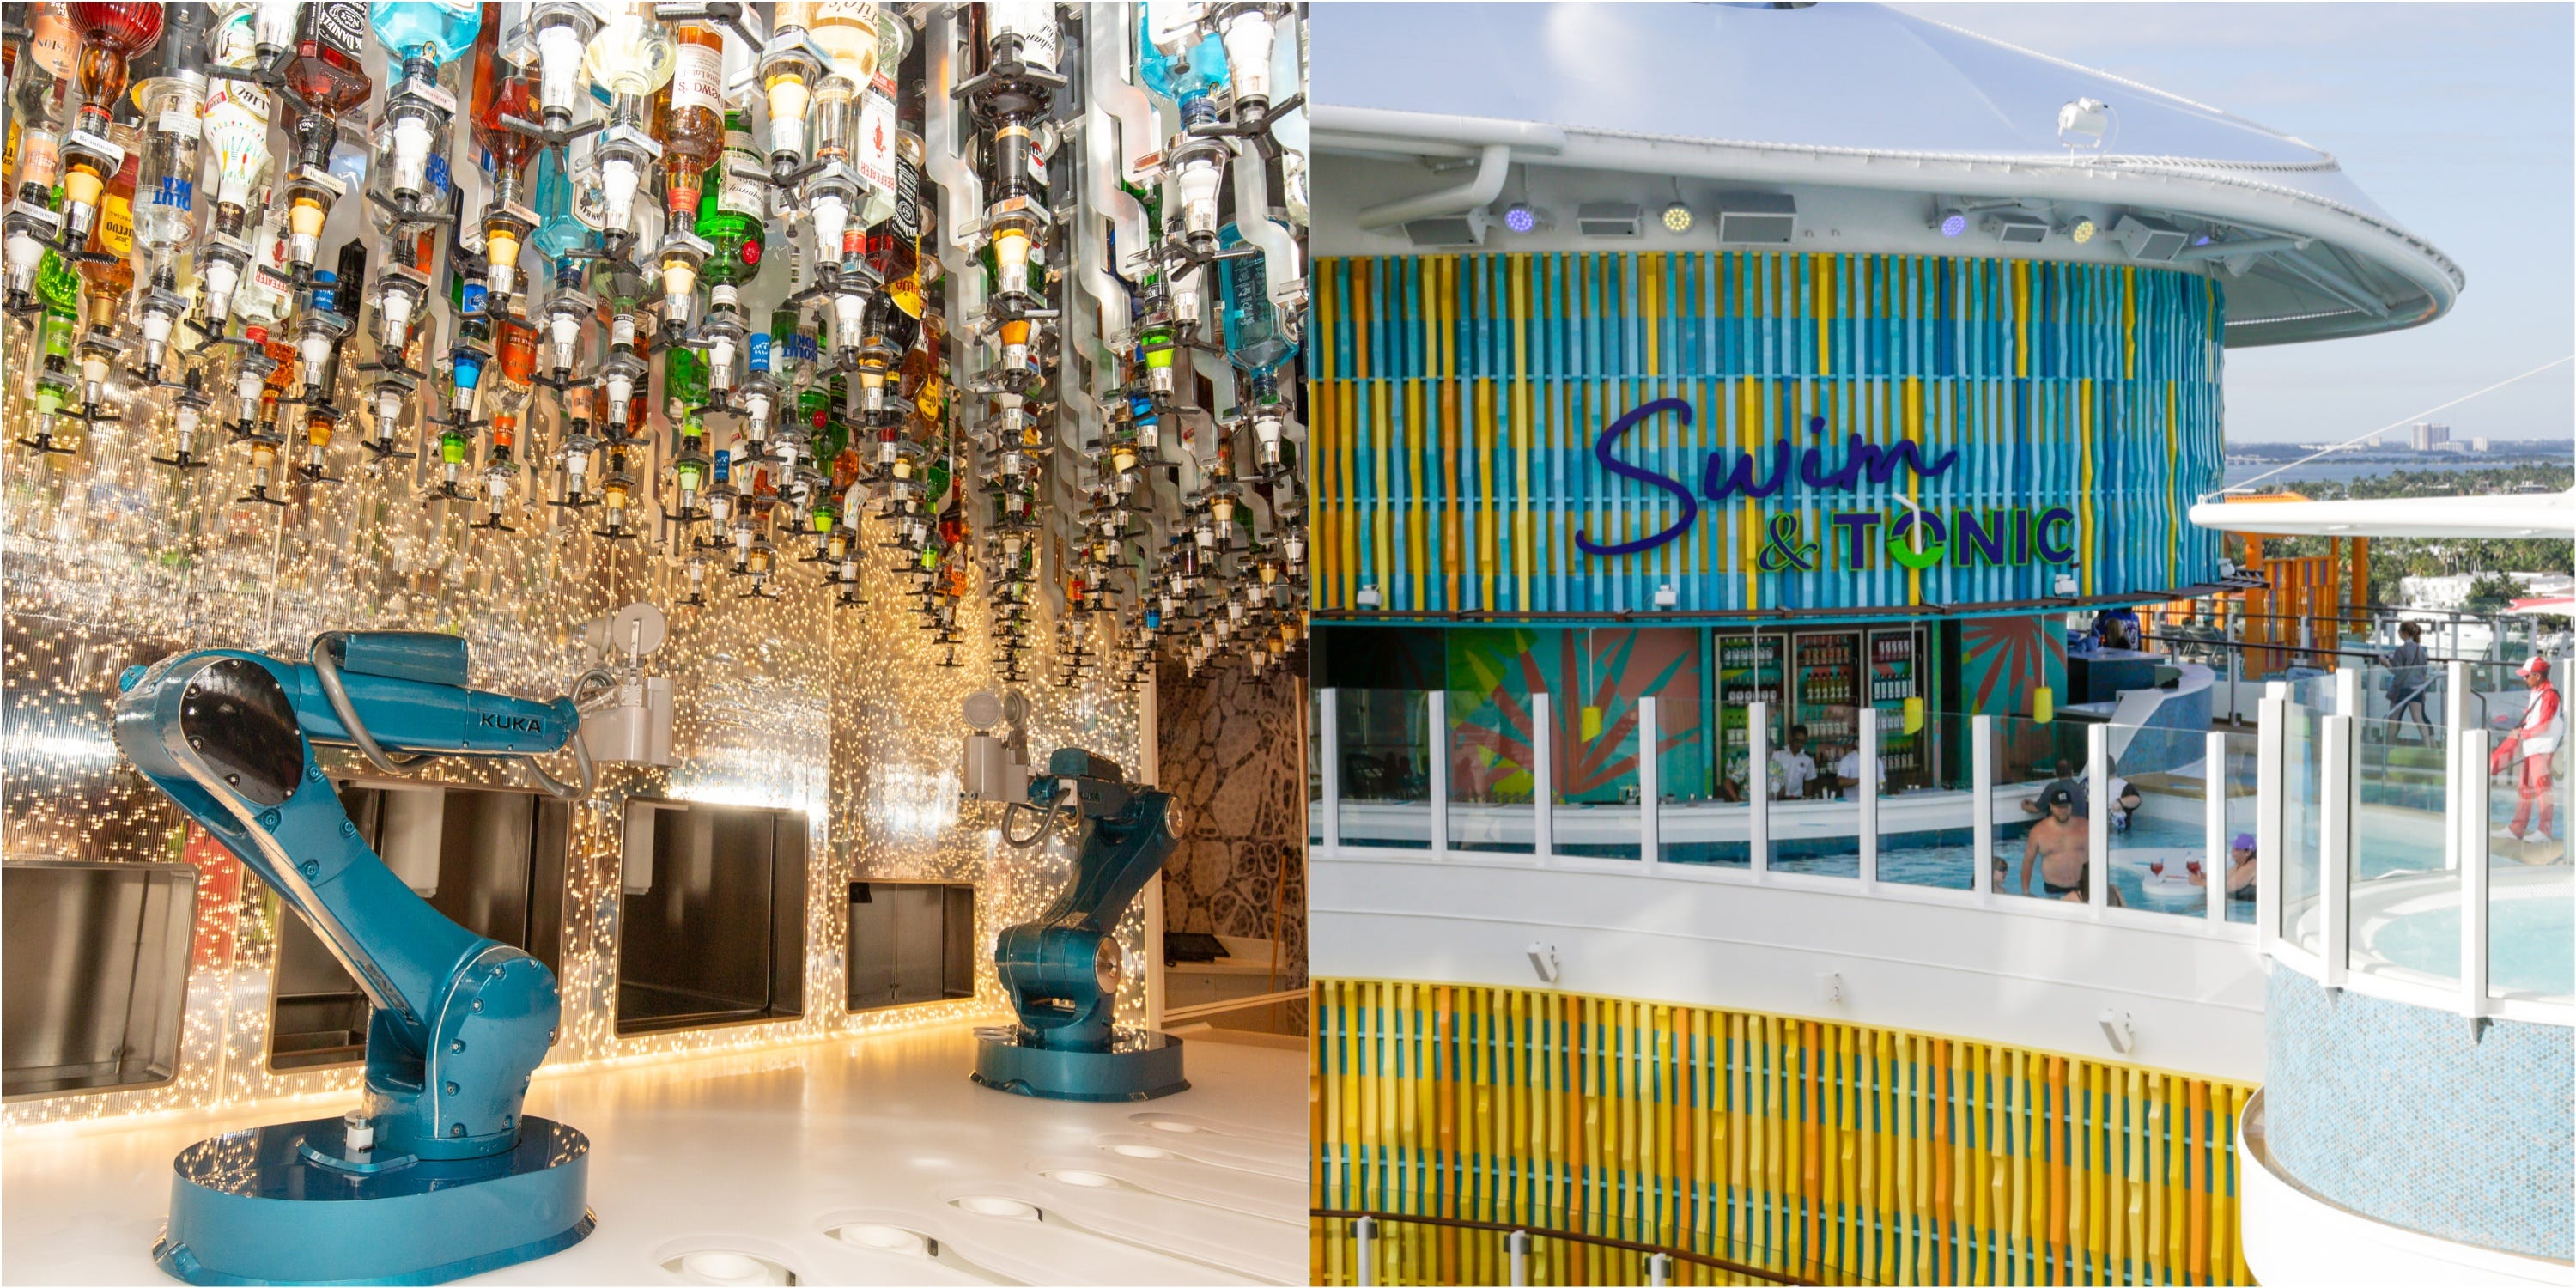 <p>Restaurants like the popular burger chain and Southern comfort-inspired Mason Jar are only on Wonder of the Seas. Fine by me: My <a href="https://www.businessinsider.com/review-royal-caribbean-wonder-of-the-sea-cruise-ship-photos-2023-1#but-the-royal-caribbean-team-scheduled-me-for-hooked-seafood-and-the-mason-jar-the-latter-is-a-new-to-brand-southern-restaurant-with-a-live-band-88">fried chicken at Mason Jar</a> was as dry as a desert.</p><p>The younger ship doesn't have Wonder's robot bartender-armed bar either. It does, however, have new watering holes with dueling pianos and live jazz.</p>